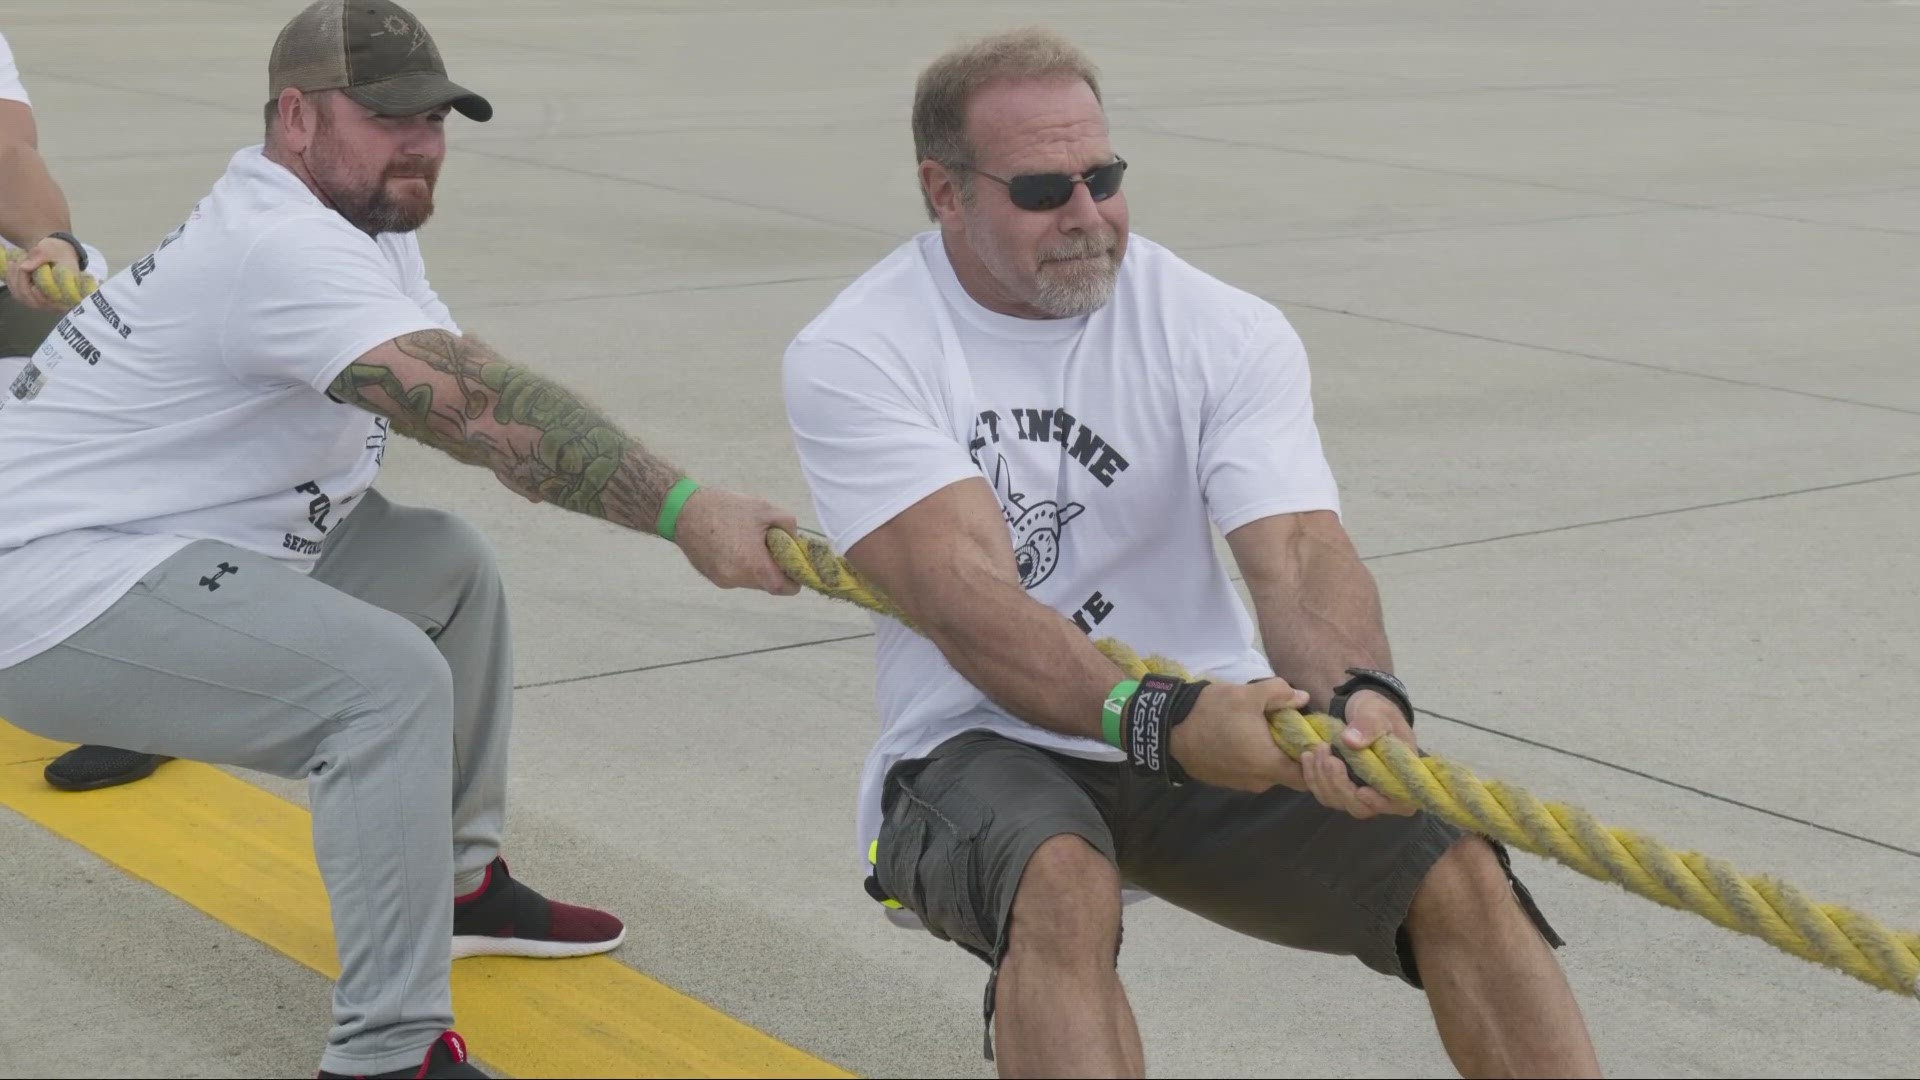 The 2023 Cleveland Plane Pull for Special Olympics Ohio is taking place on Saturday, Sept. 16 at the I-X Center.